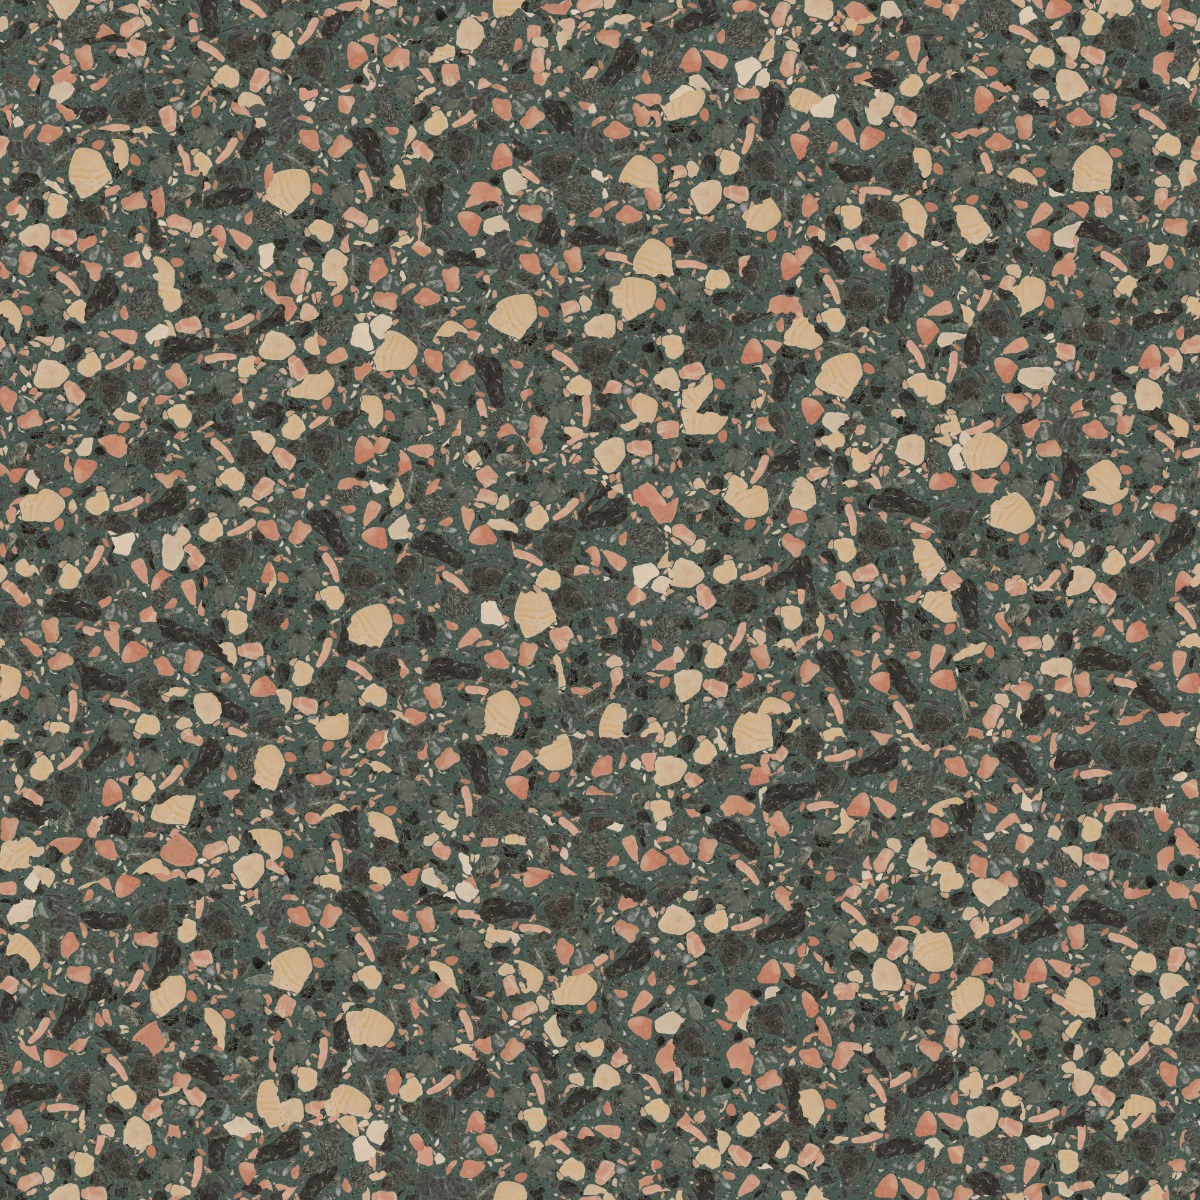 A seamless terrazzo texture with egsm d155 terrazzo units arranged in a None pattern